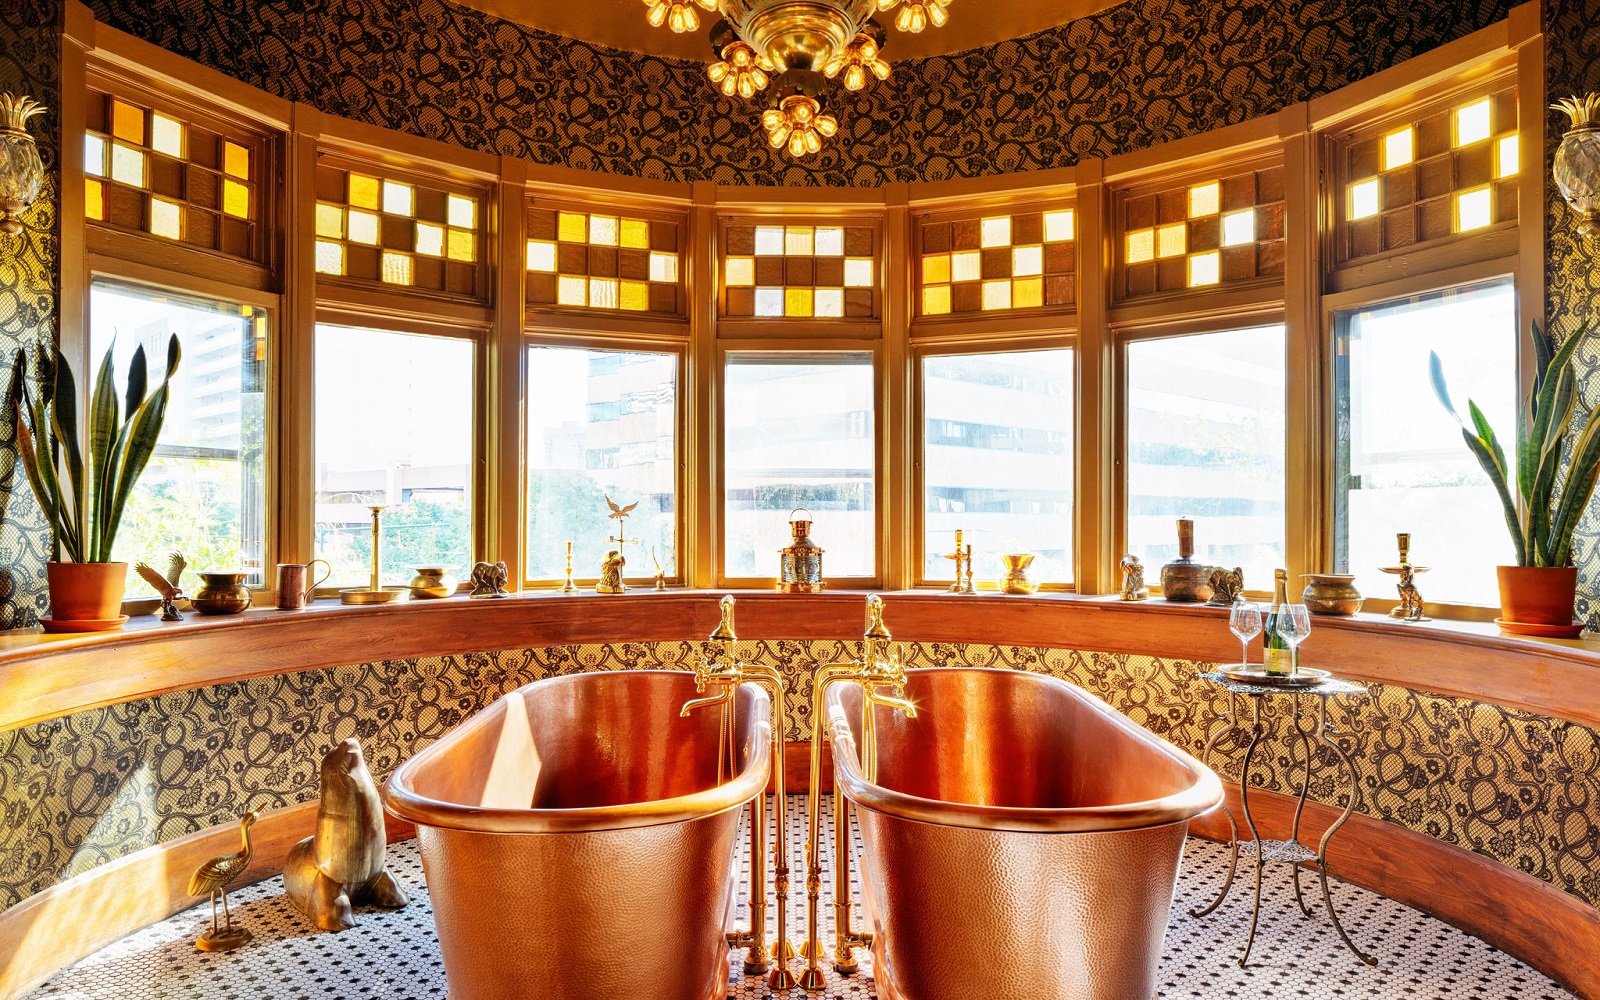 two freestanding copper baths in front of rounded windows with stained glass detail and view across denver